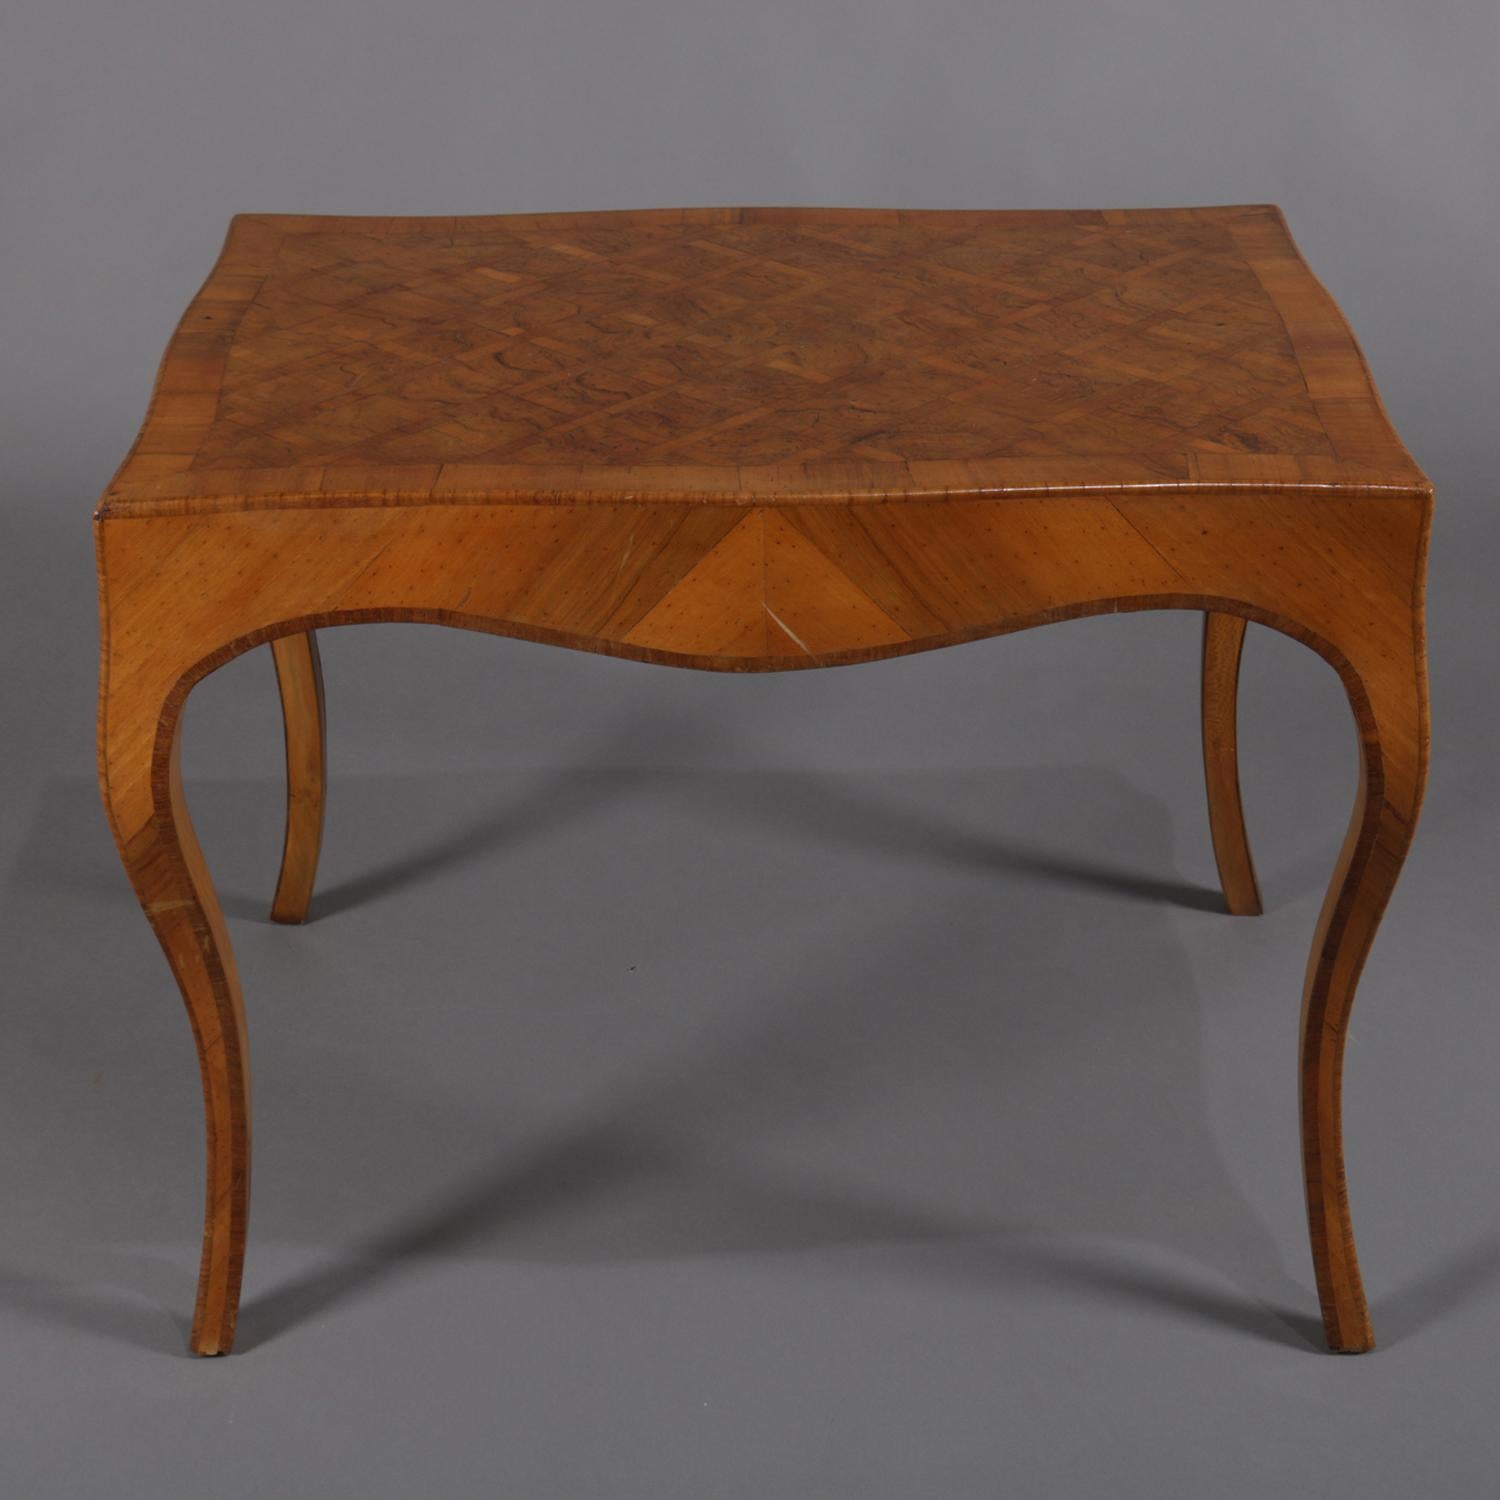 Antique Italian Parquetry Inlaid Mahogany Low Centre Cocktail Table 19th Century 2